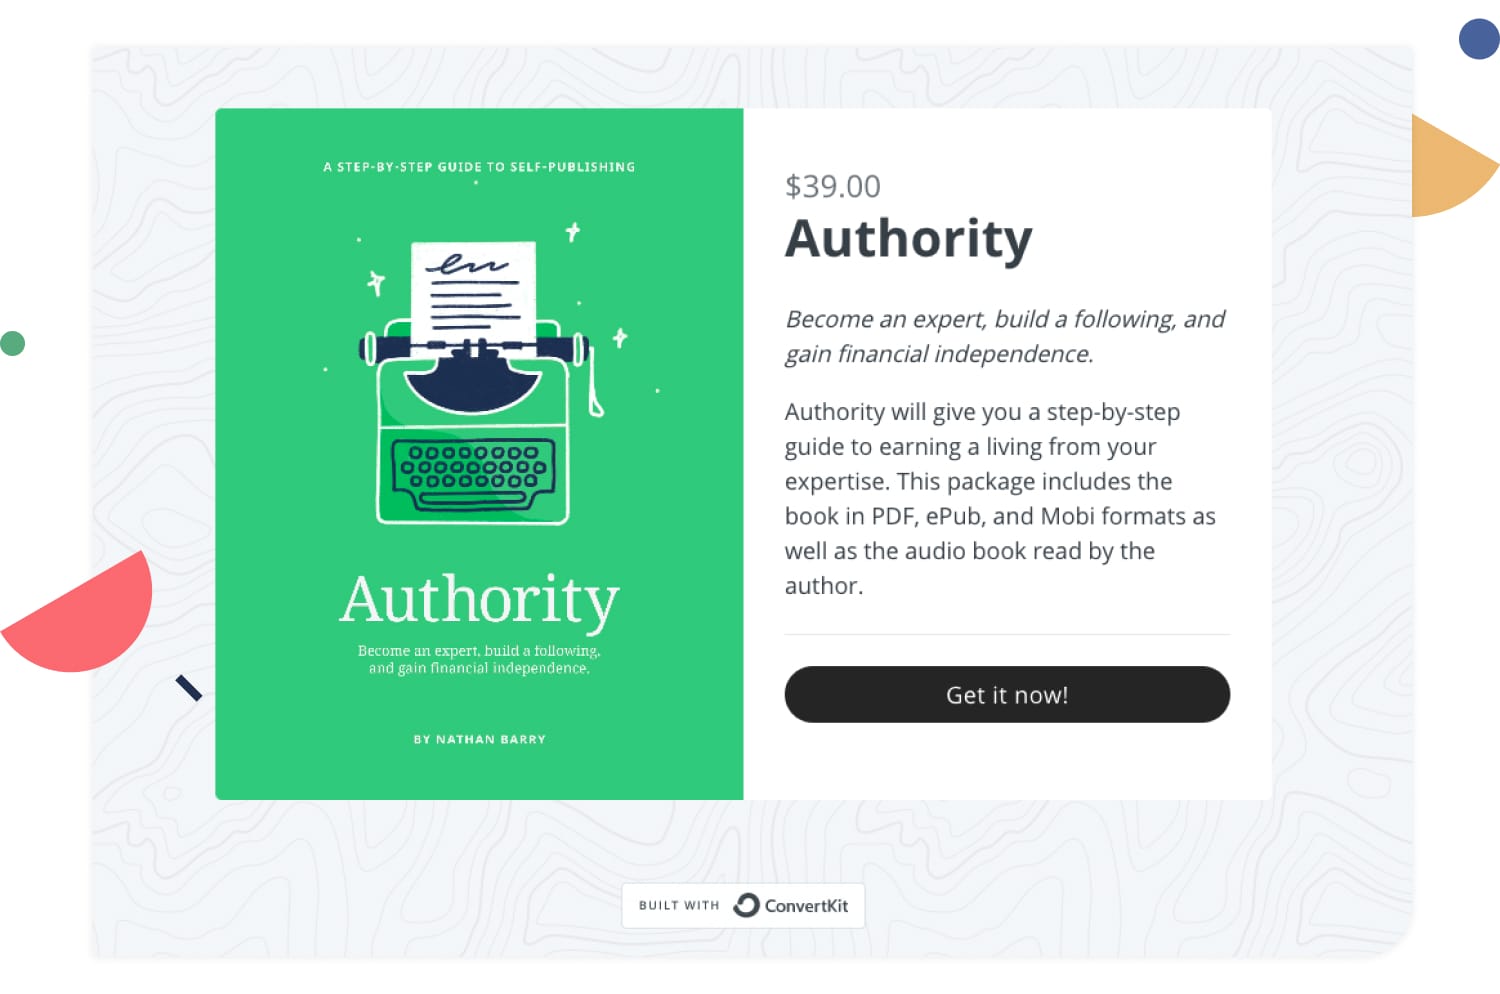 The Authority ebook package comes with multiple file types, including an audiobook read by the author. Image via Nathan Barry.